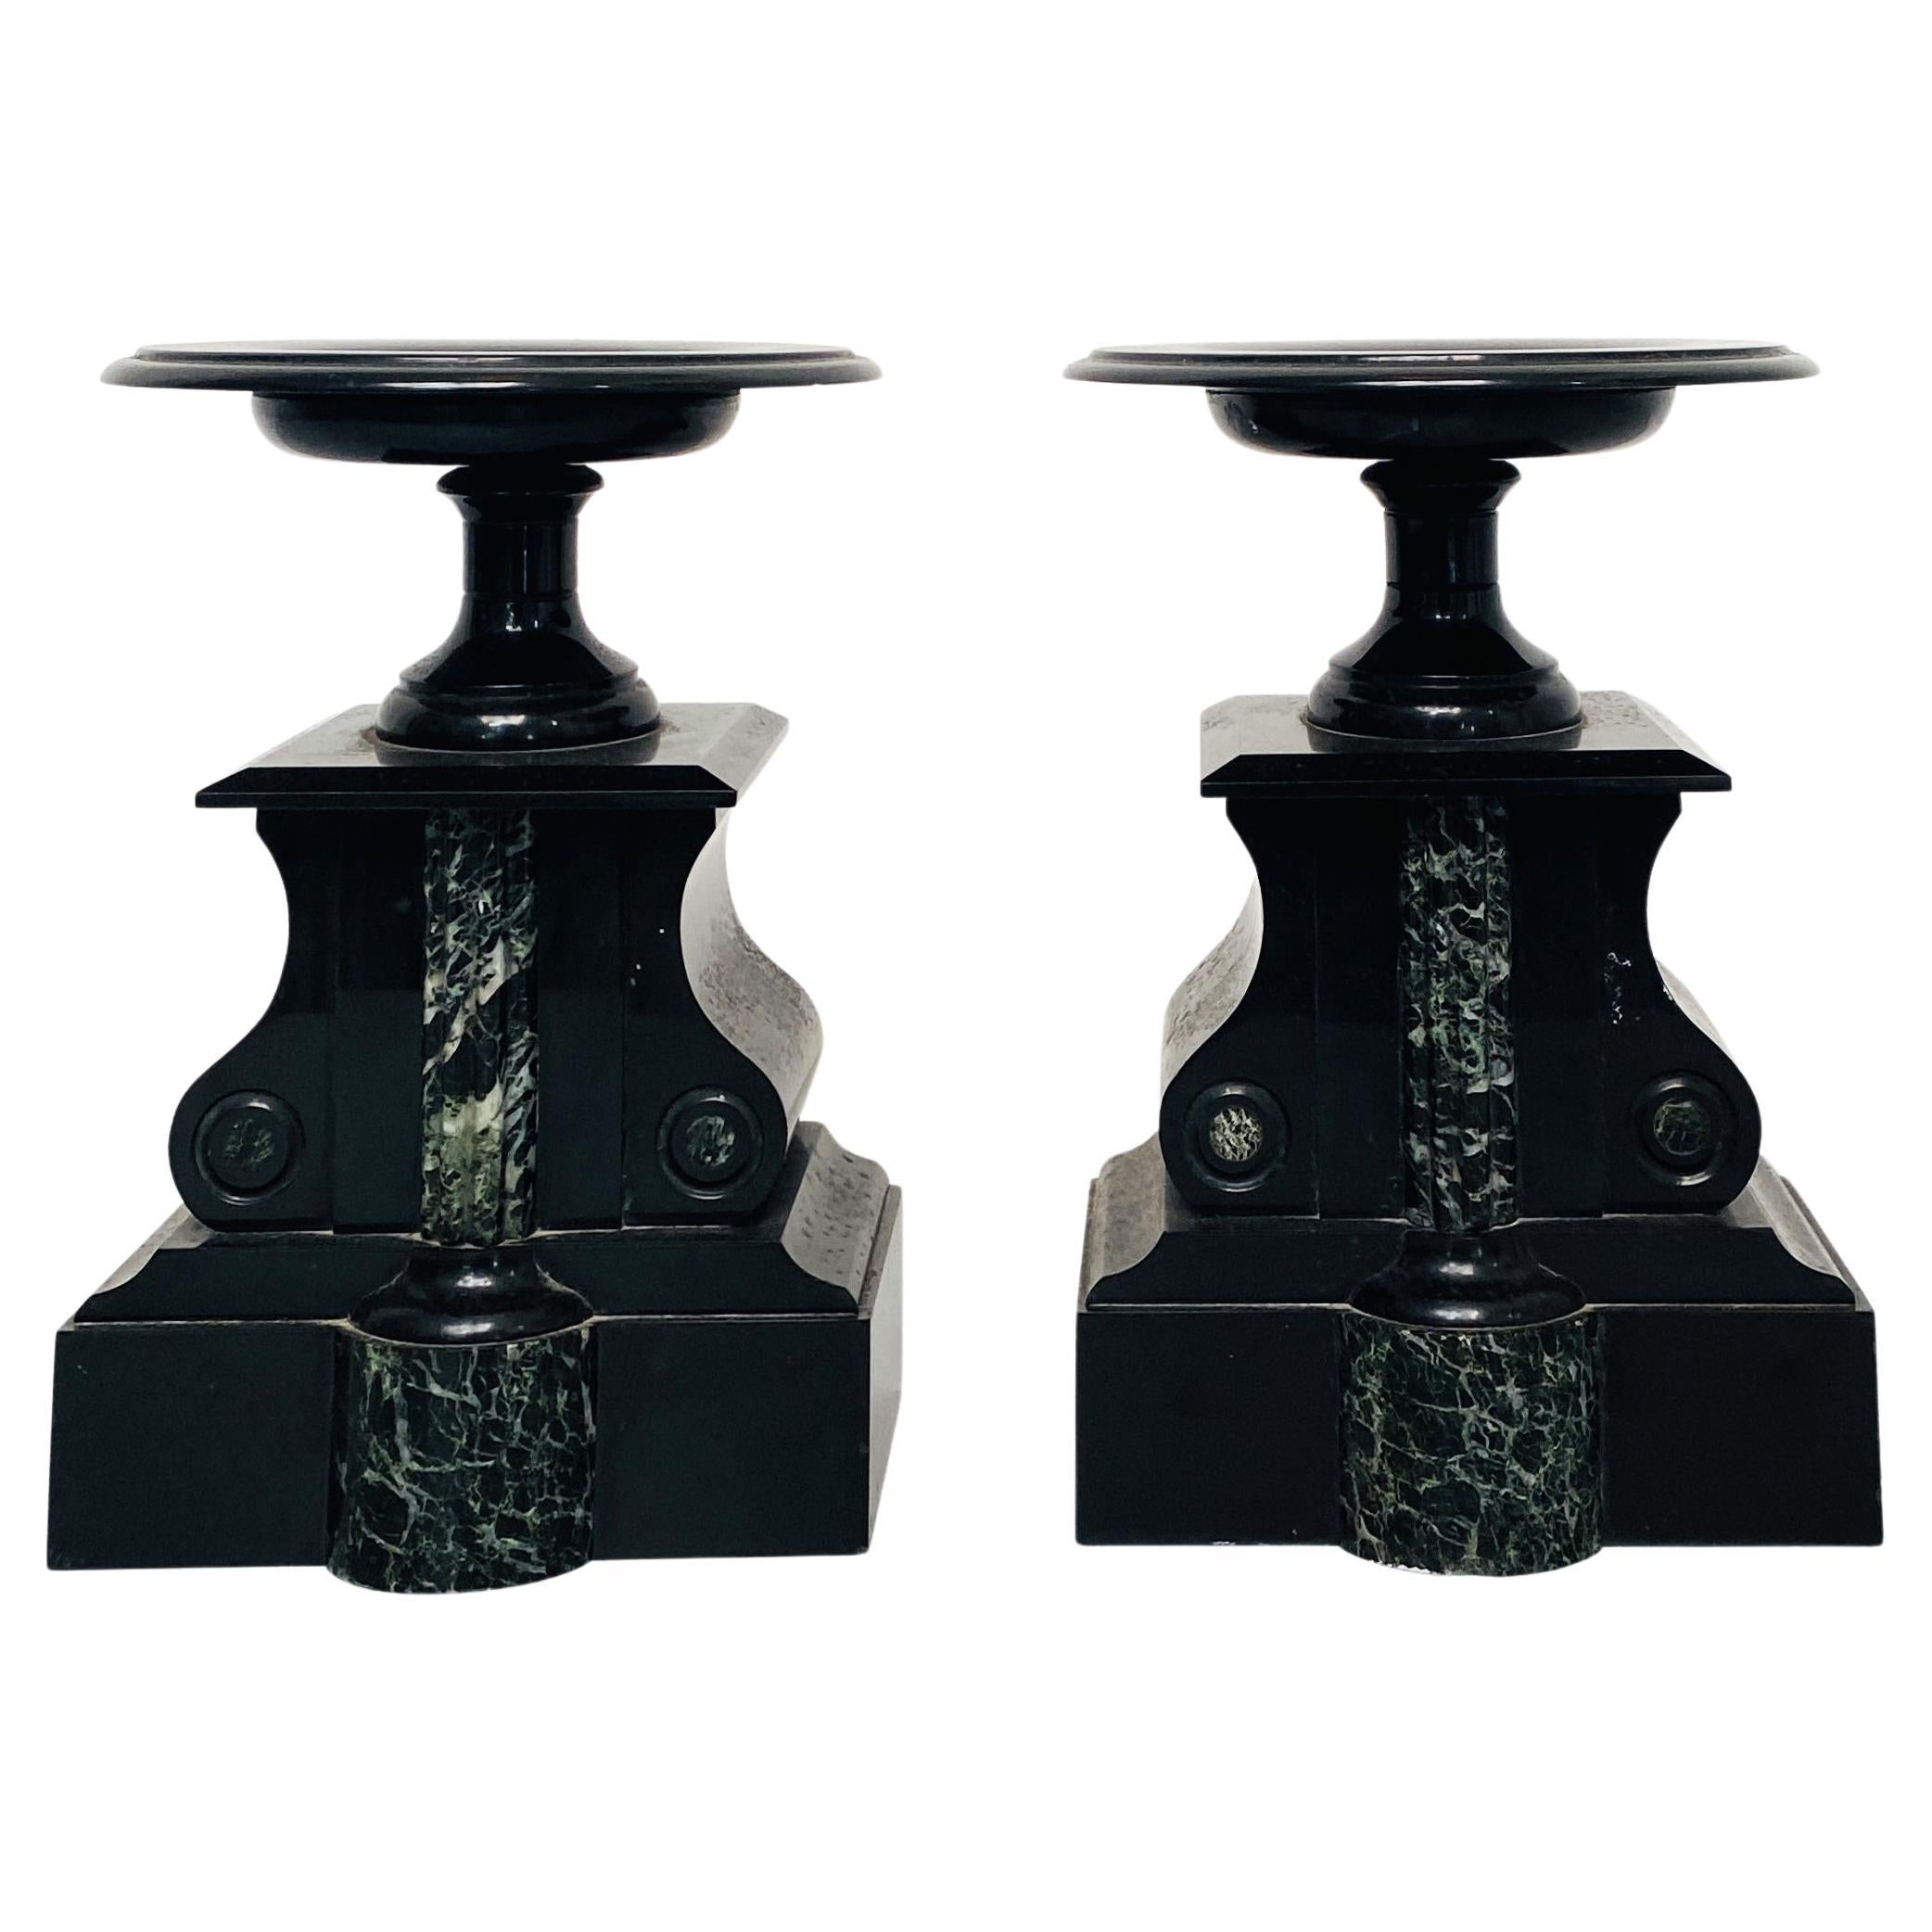 Italian Art Deco Black Onyx Centerpieces with Shape of a Balance, 1940s For Sale